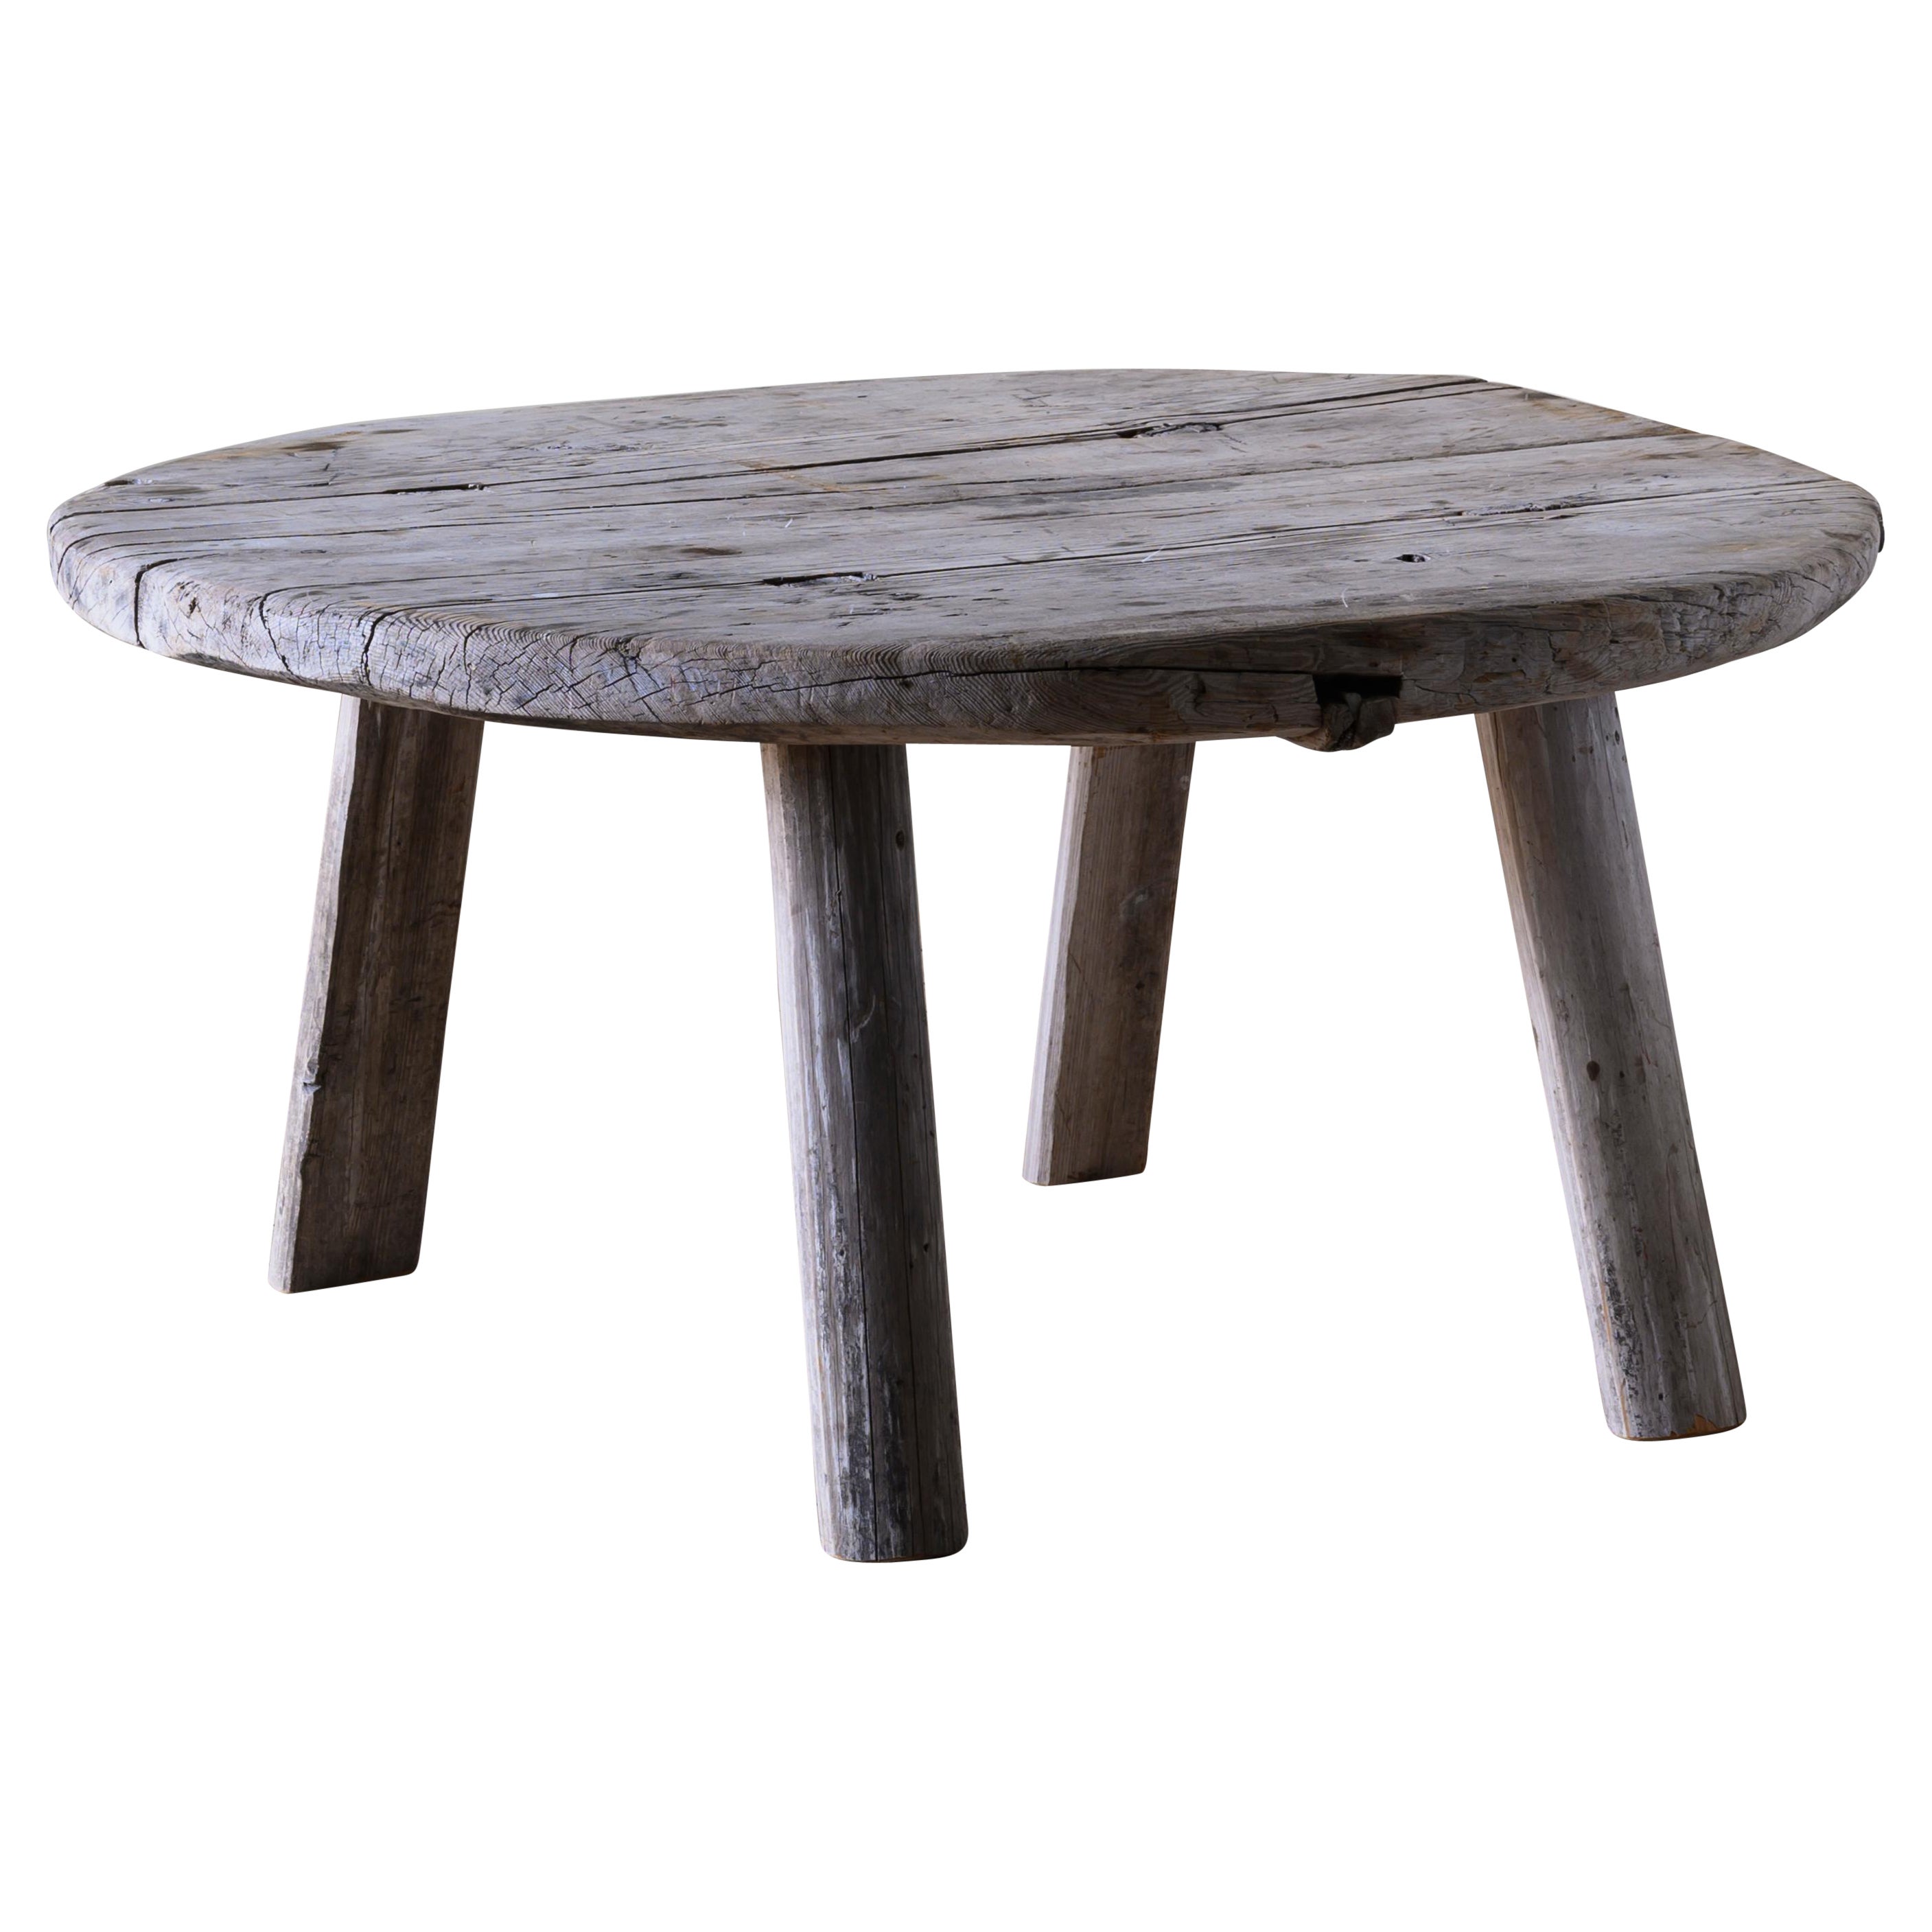 18th Century Swedish Provincial 'Hedna' Table For Sale